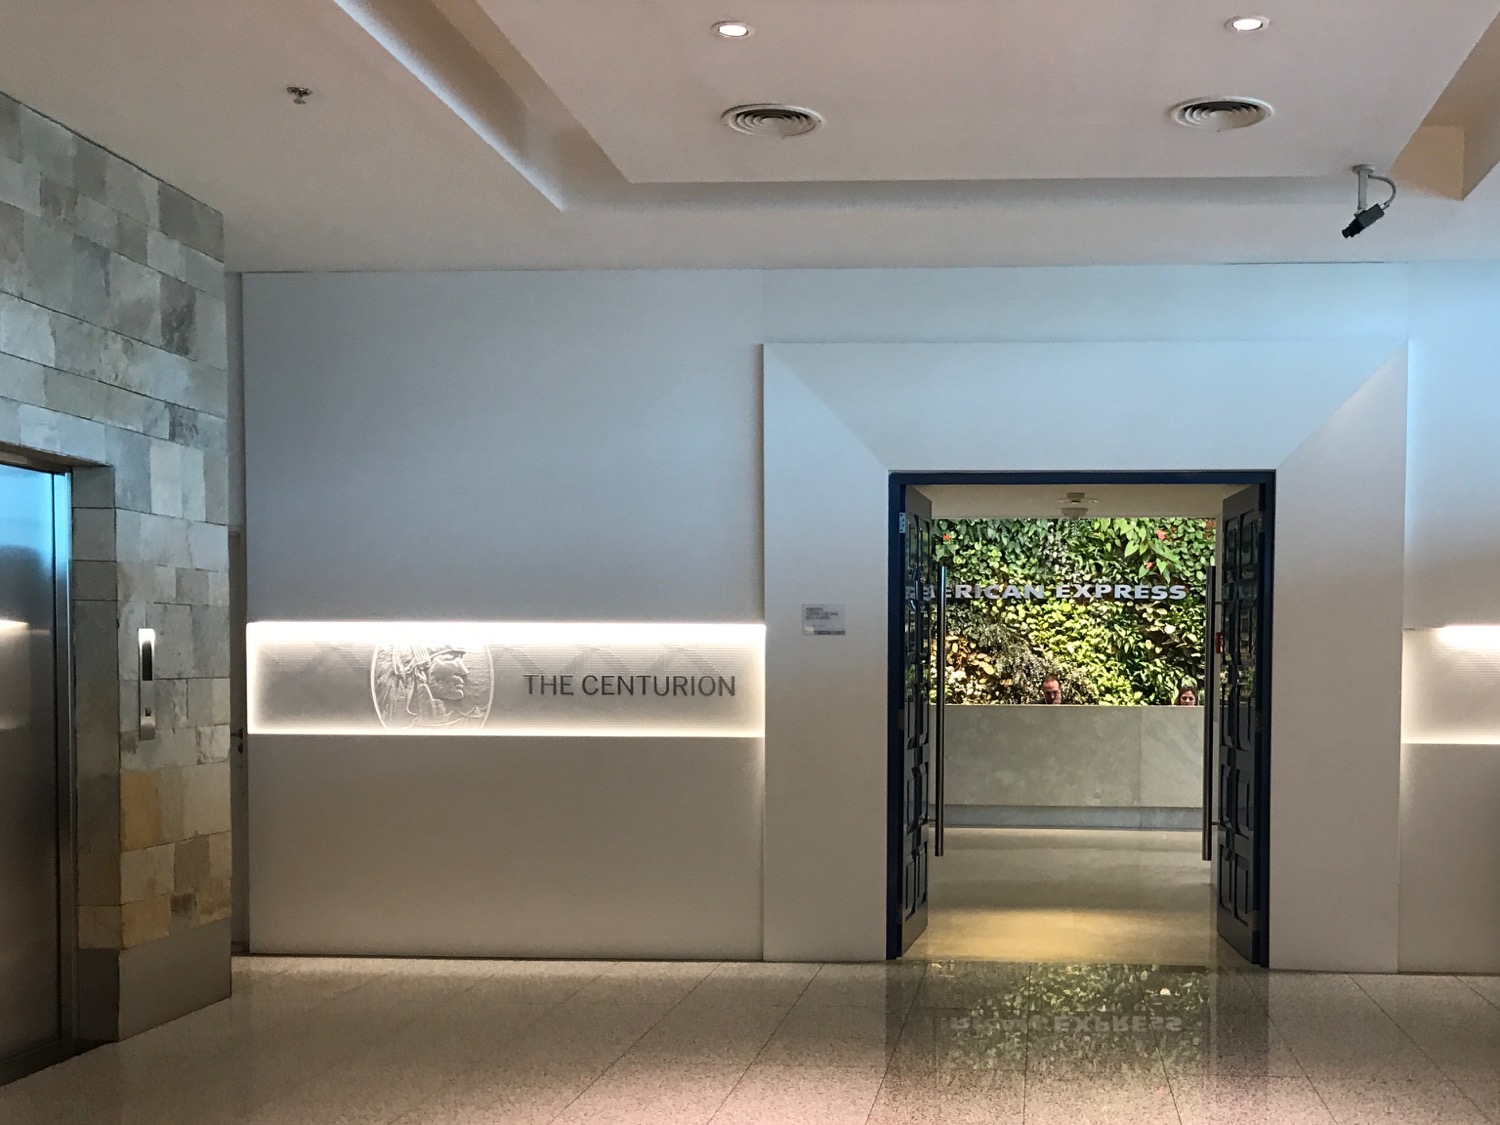 American Express Centurion Lounge Paid Access